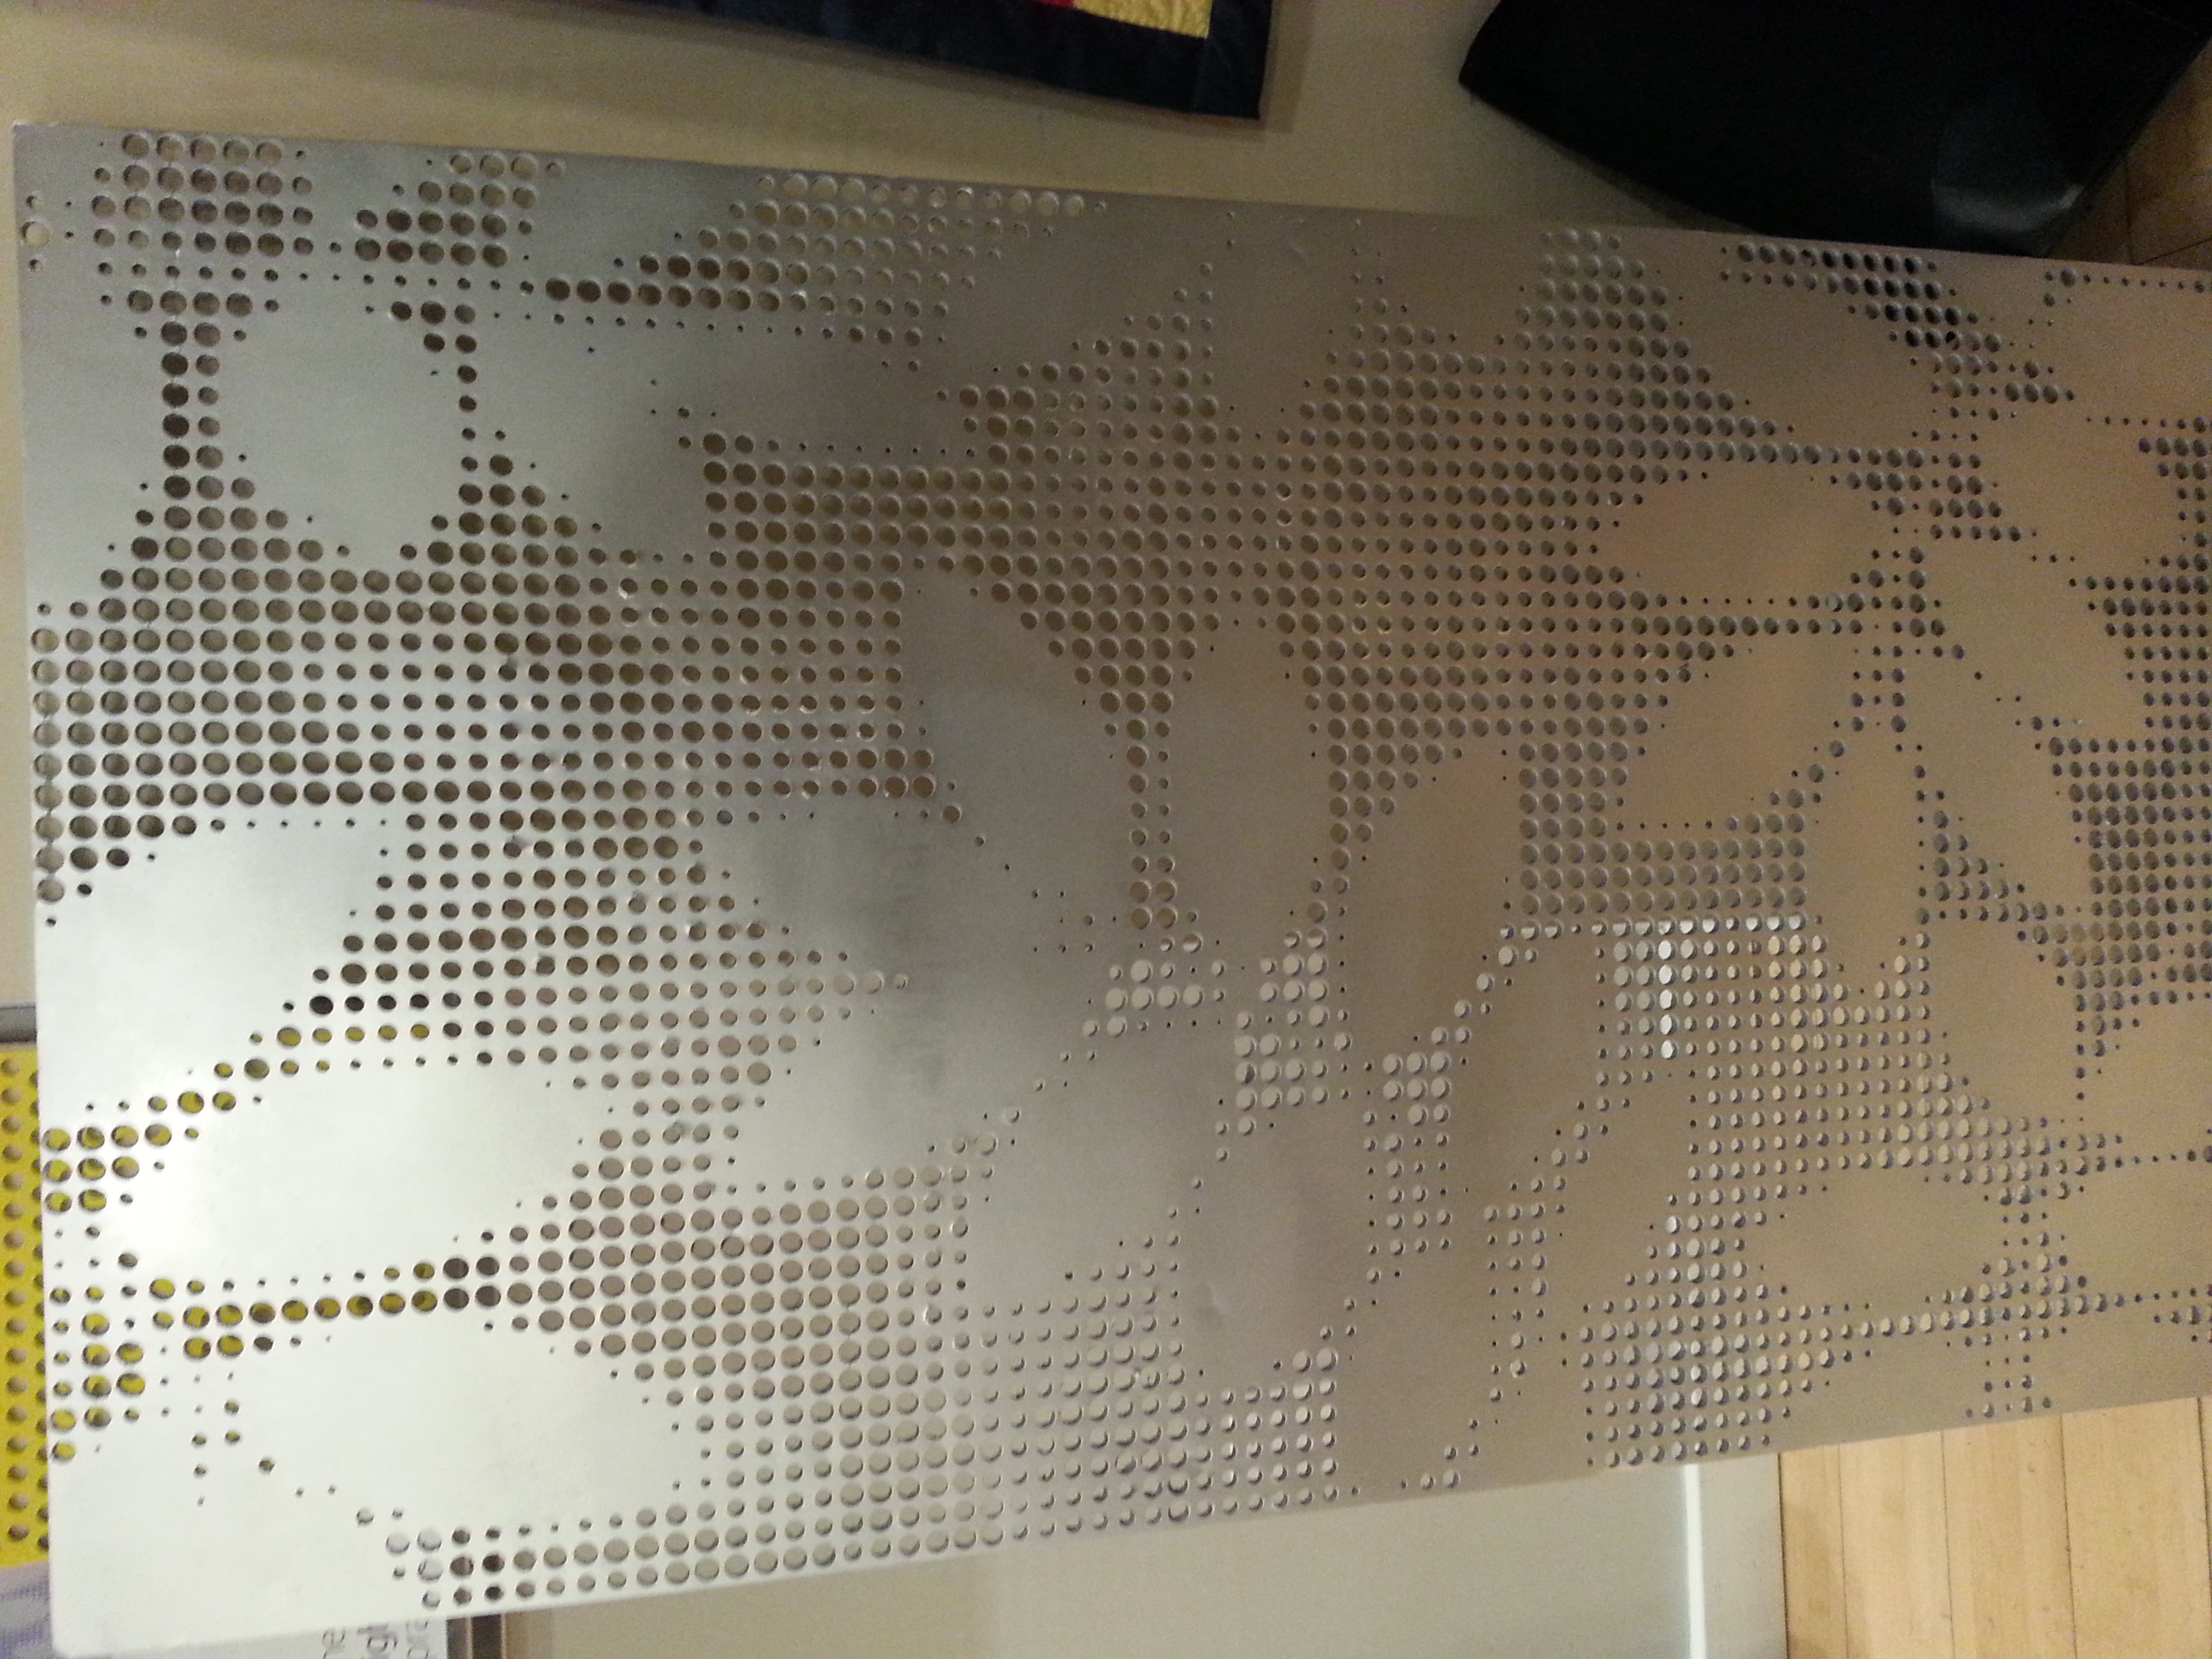 A mock-up of the water jet-cut screen